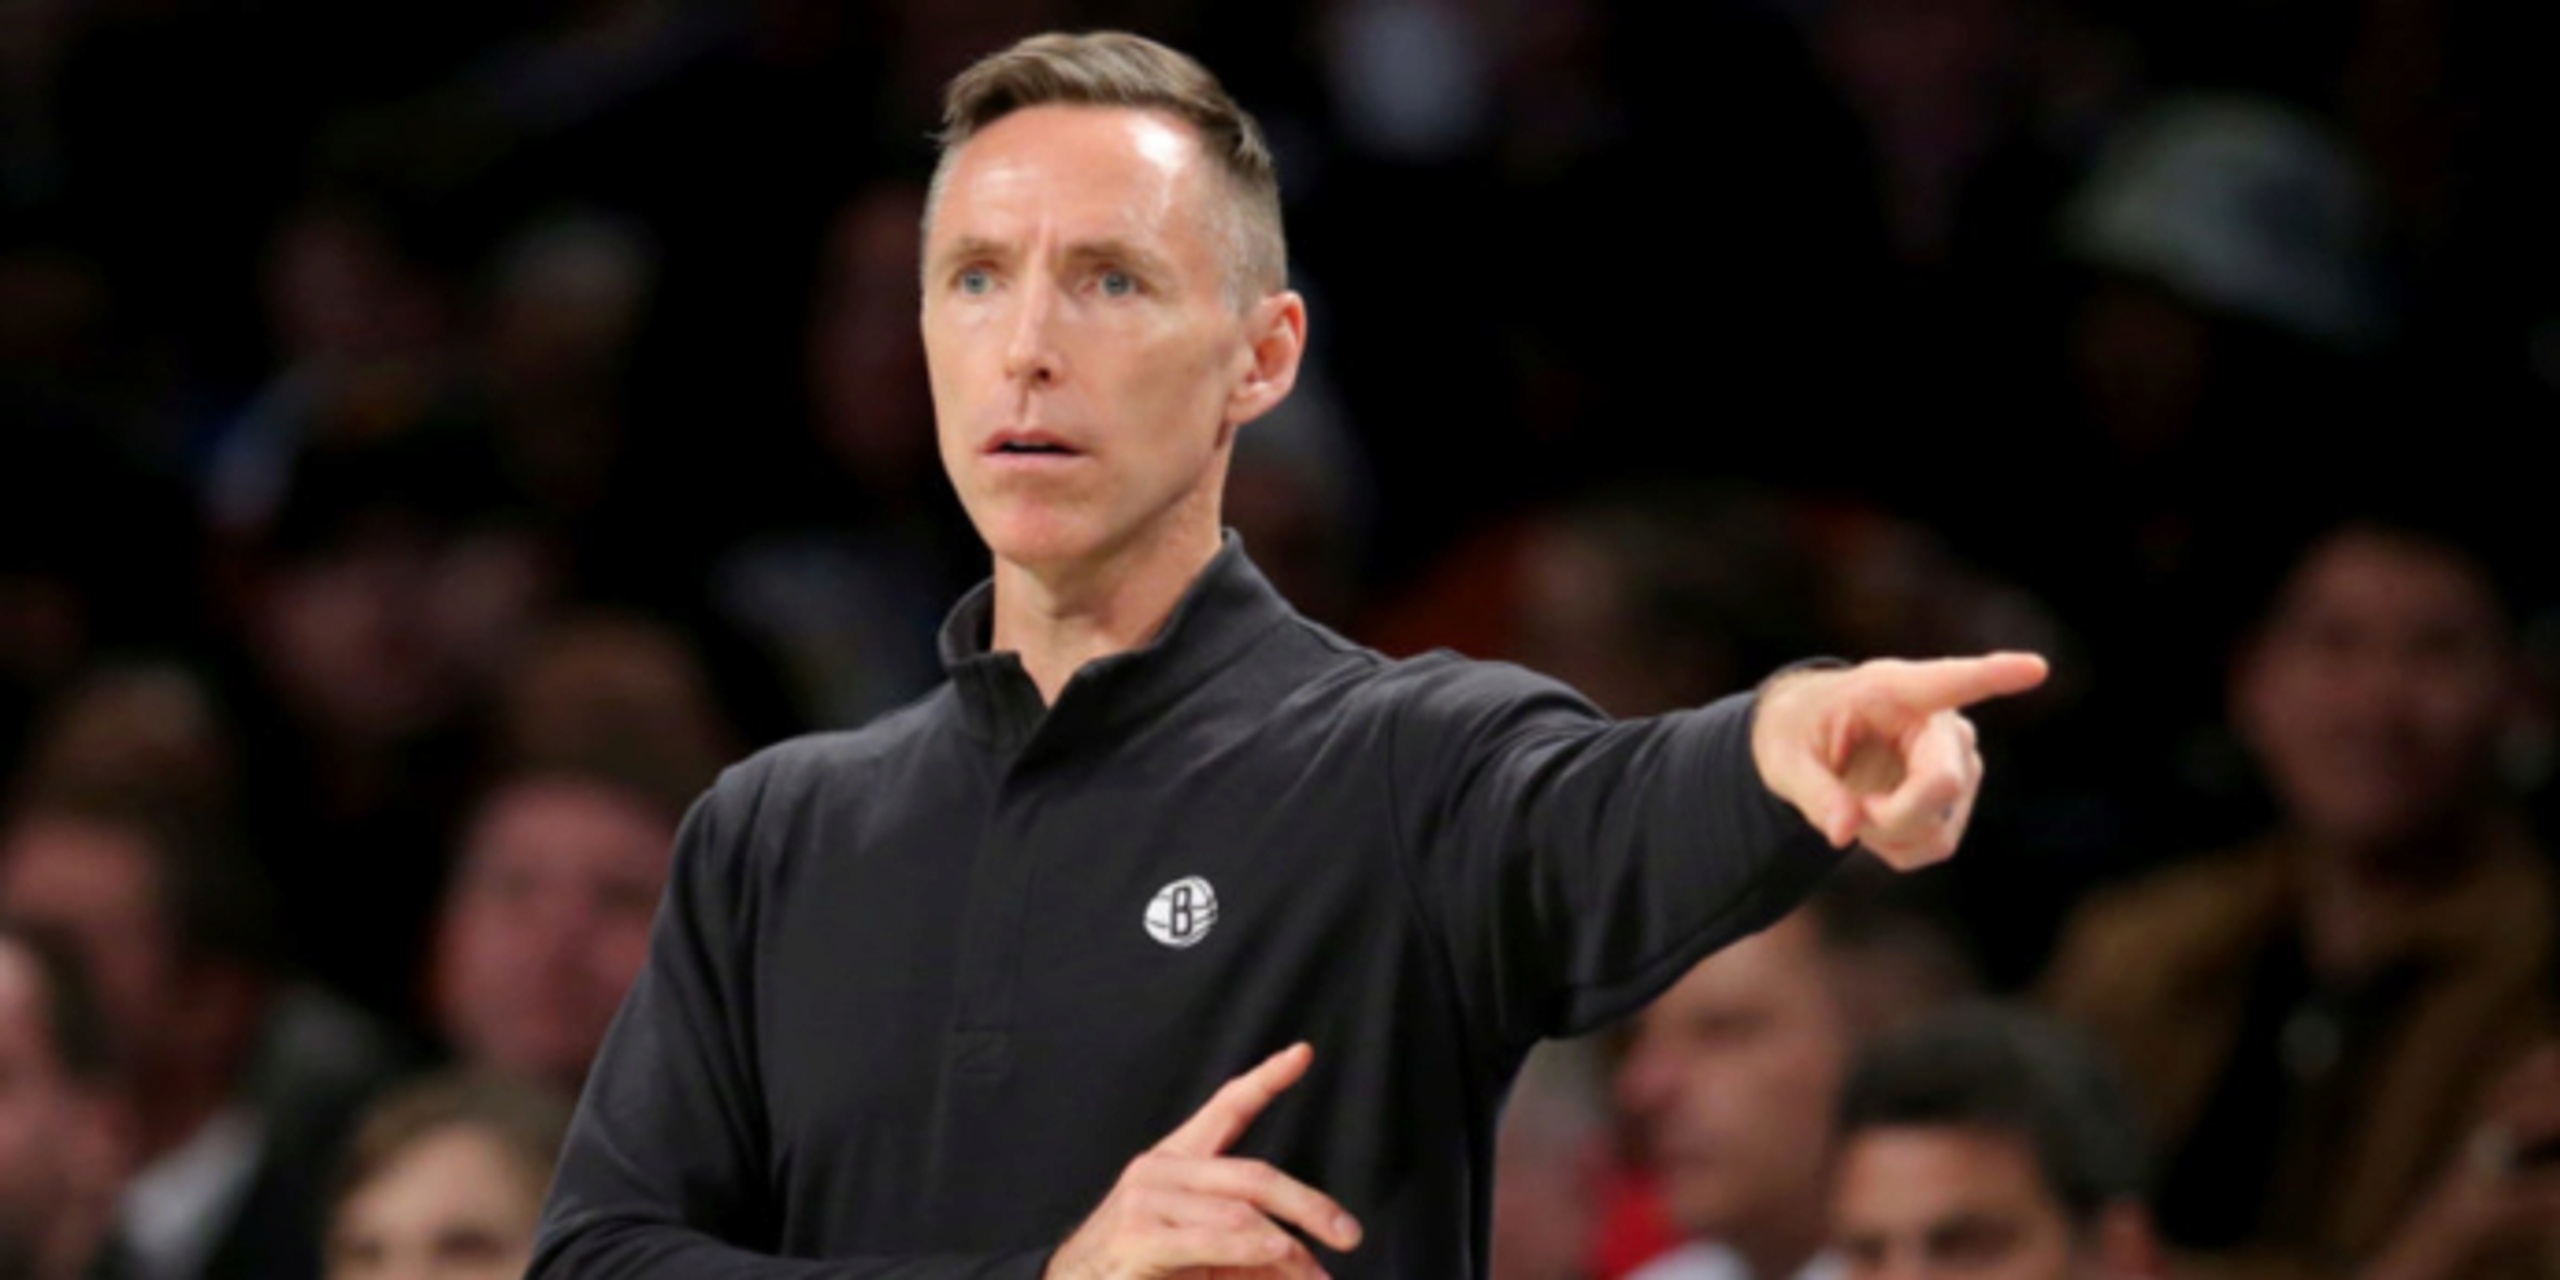 Nets' Steve Nash: Memphis has balanced roster, ours built on three stars